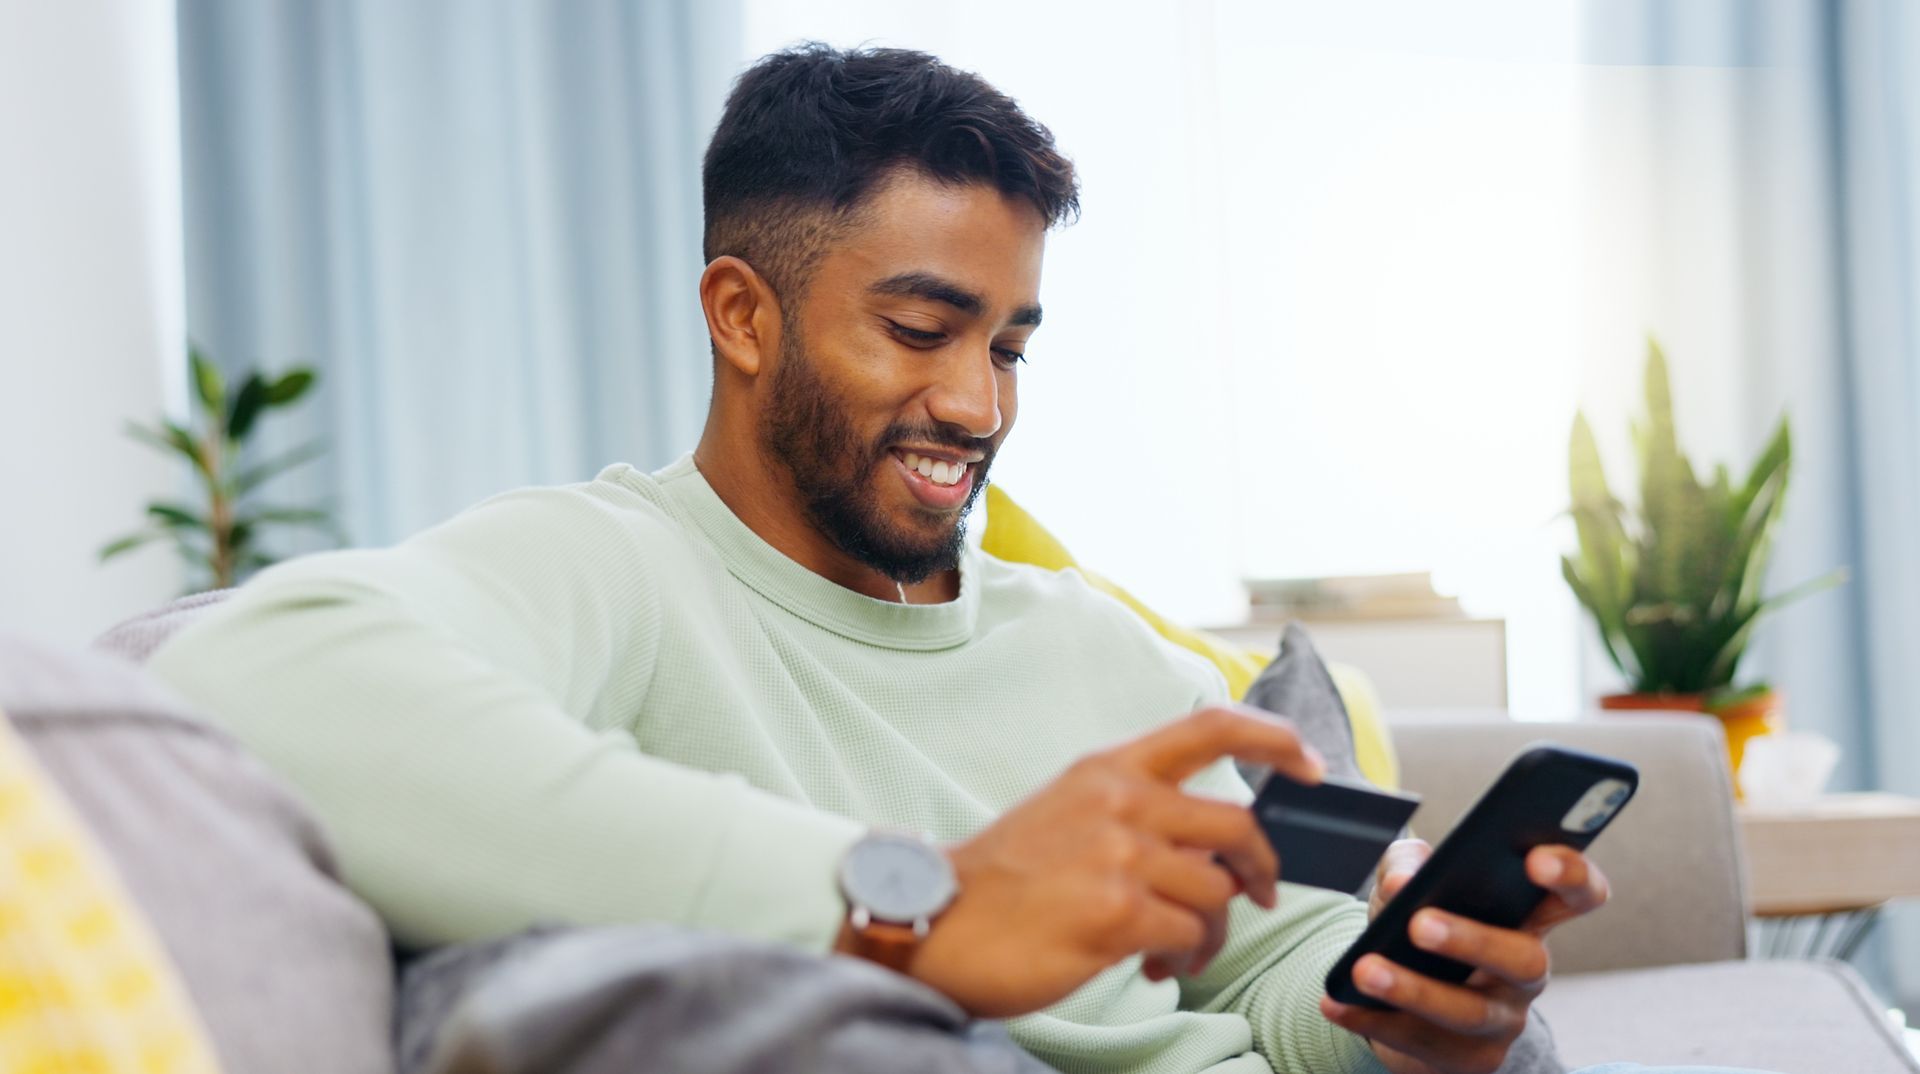 a man is smiling and sitting on a sofa using a credit card and a mobile phone